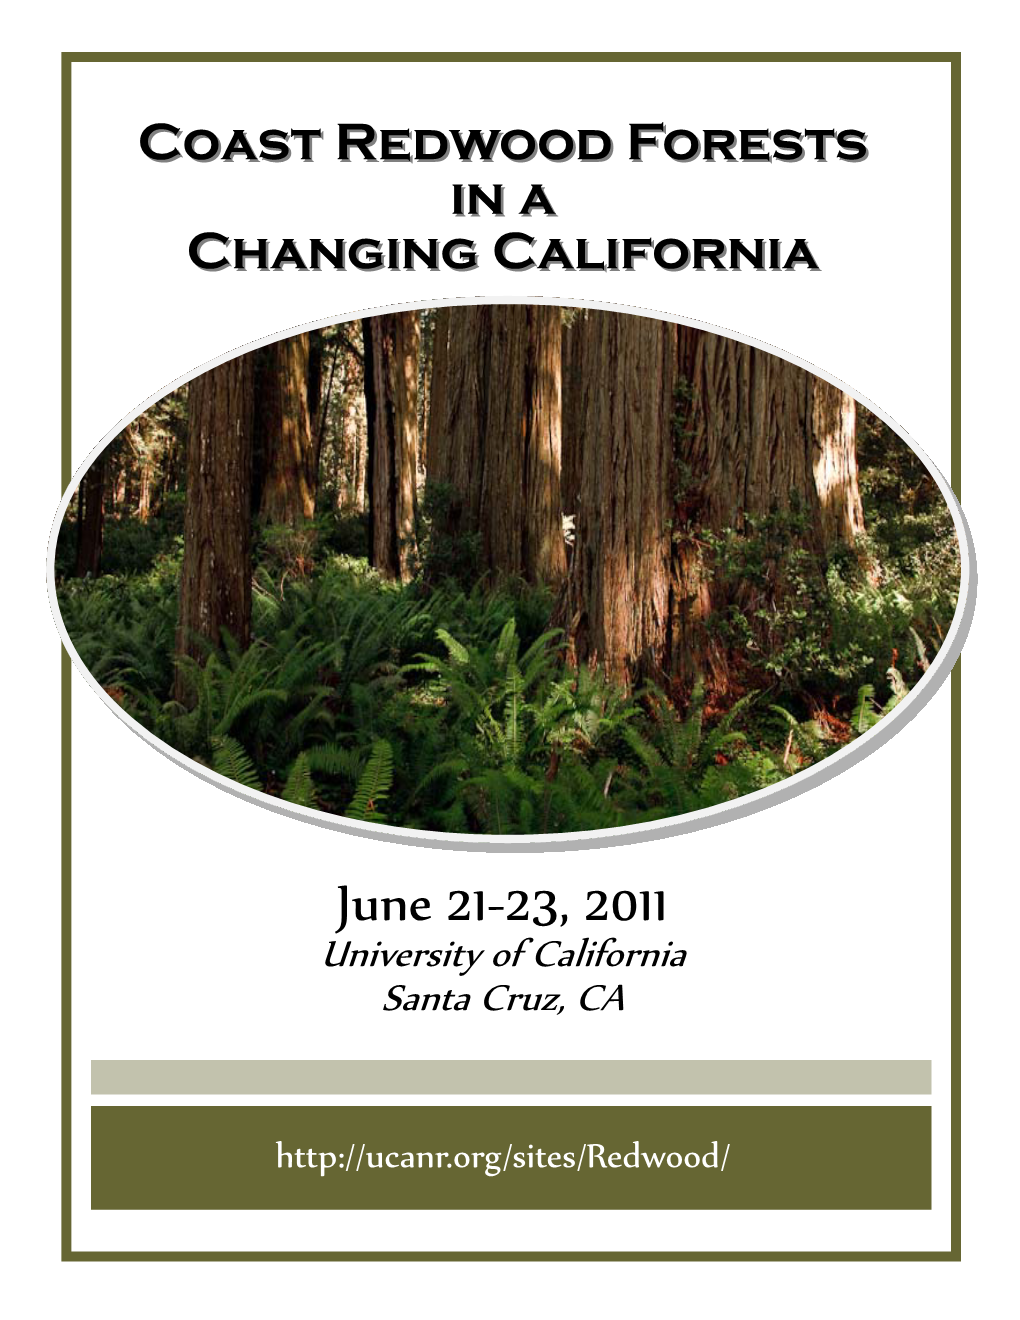 Coast Redwood Forests in a Changing California